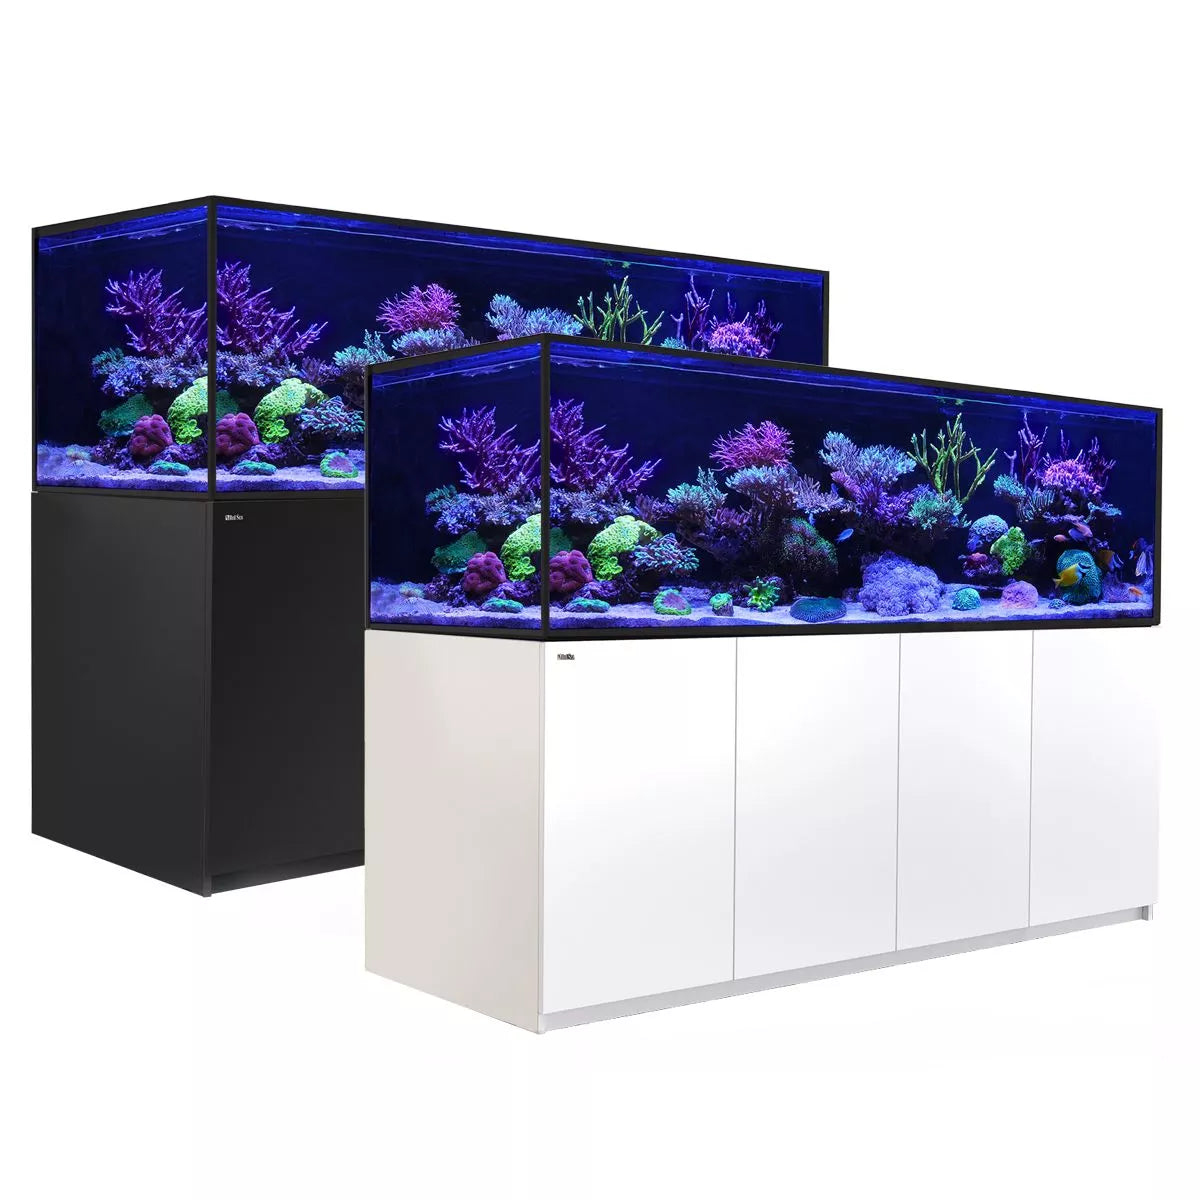 Is my Red Sea Reefer XL 425 safe to fill? Serious concern.